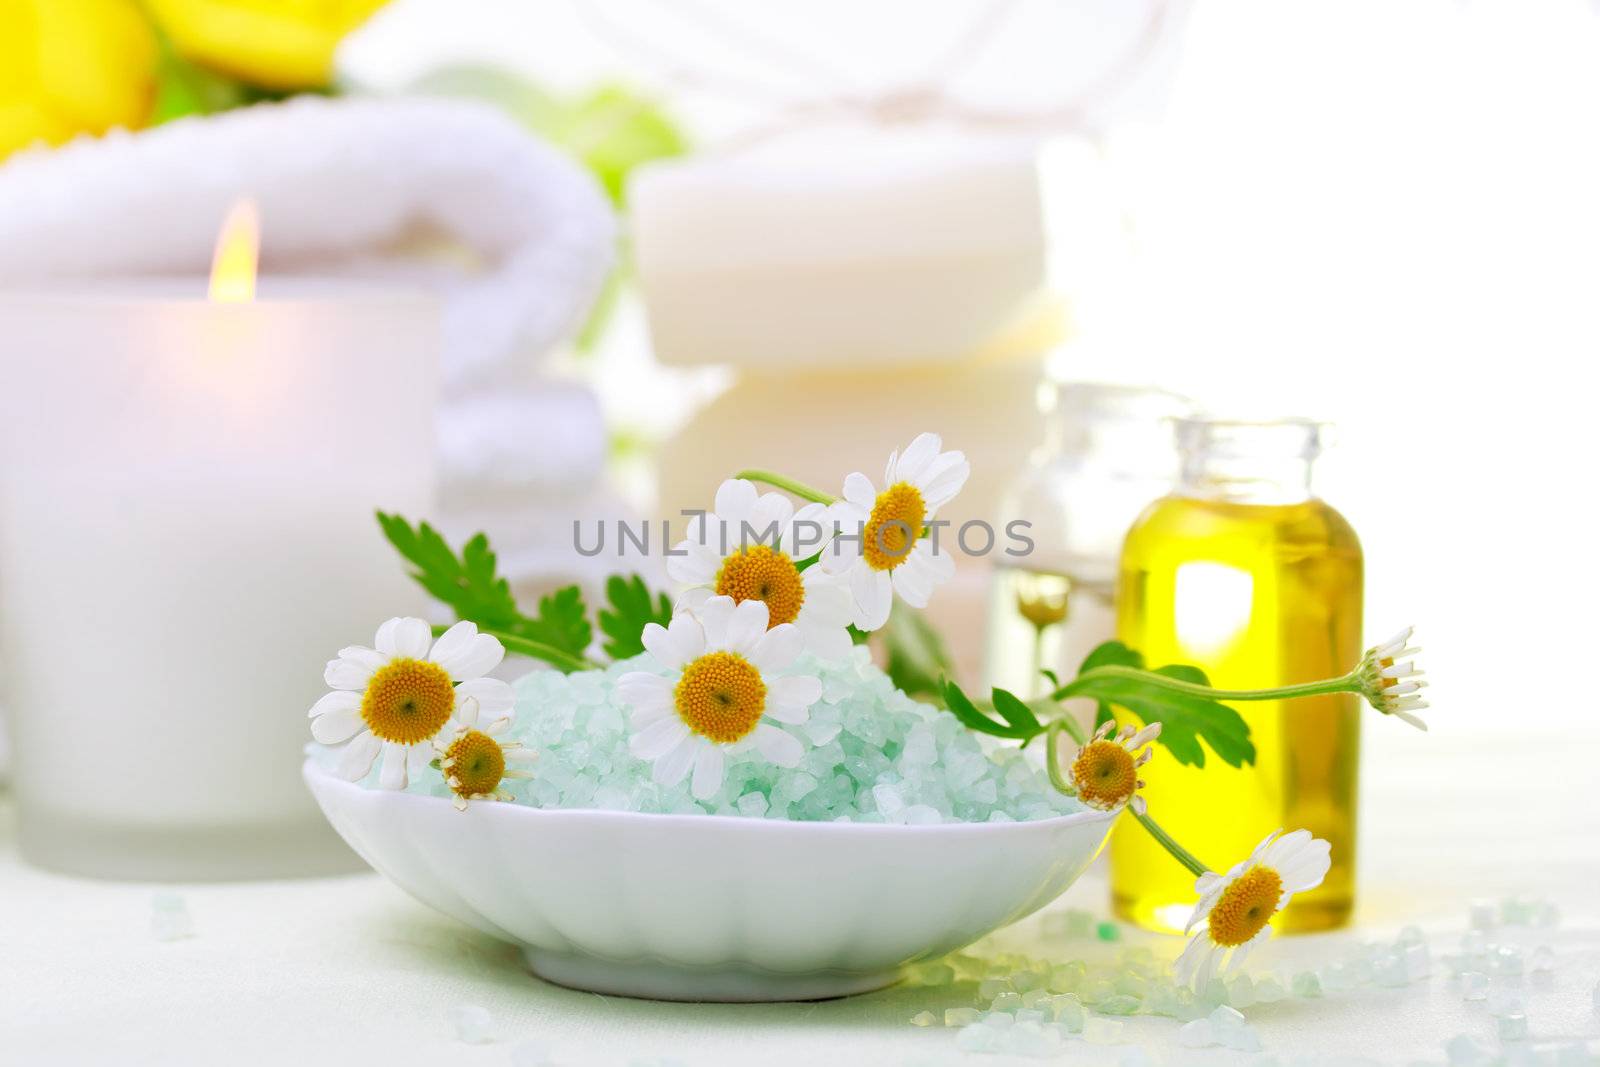 Spa relaxation theme with flowers, bath salt, essential oil and candles by melpomene